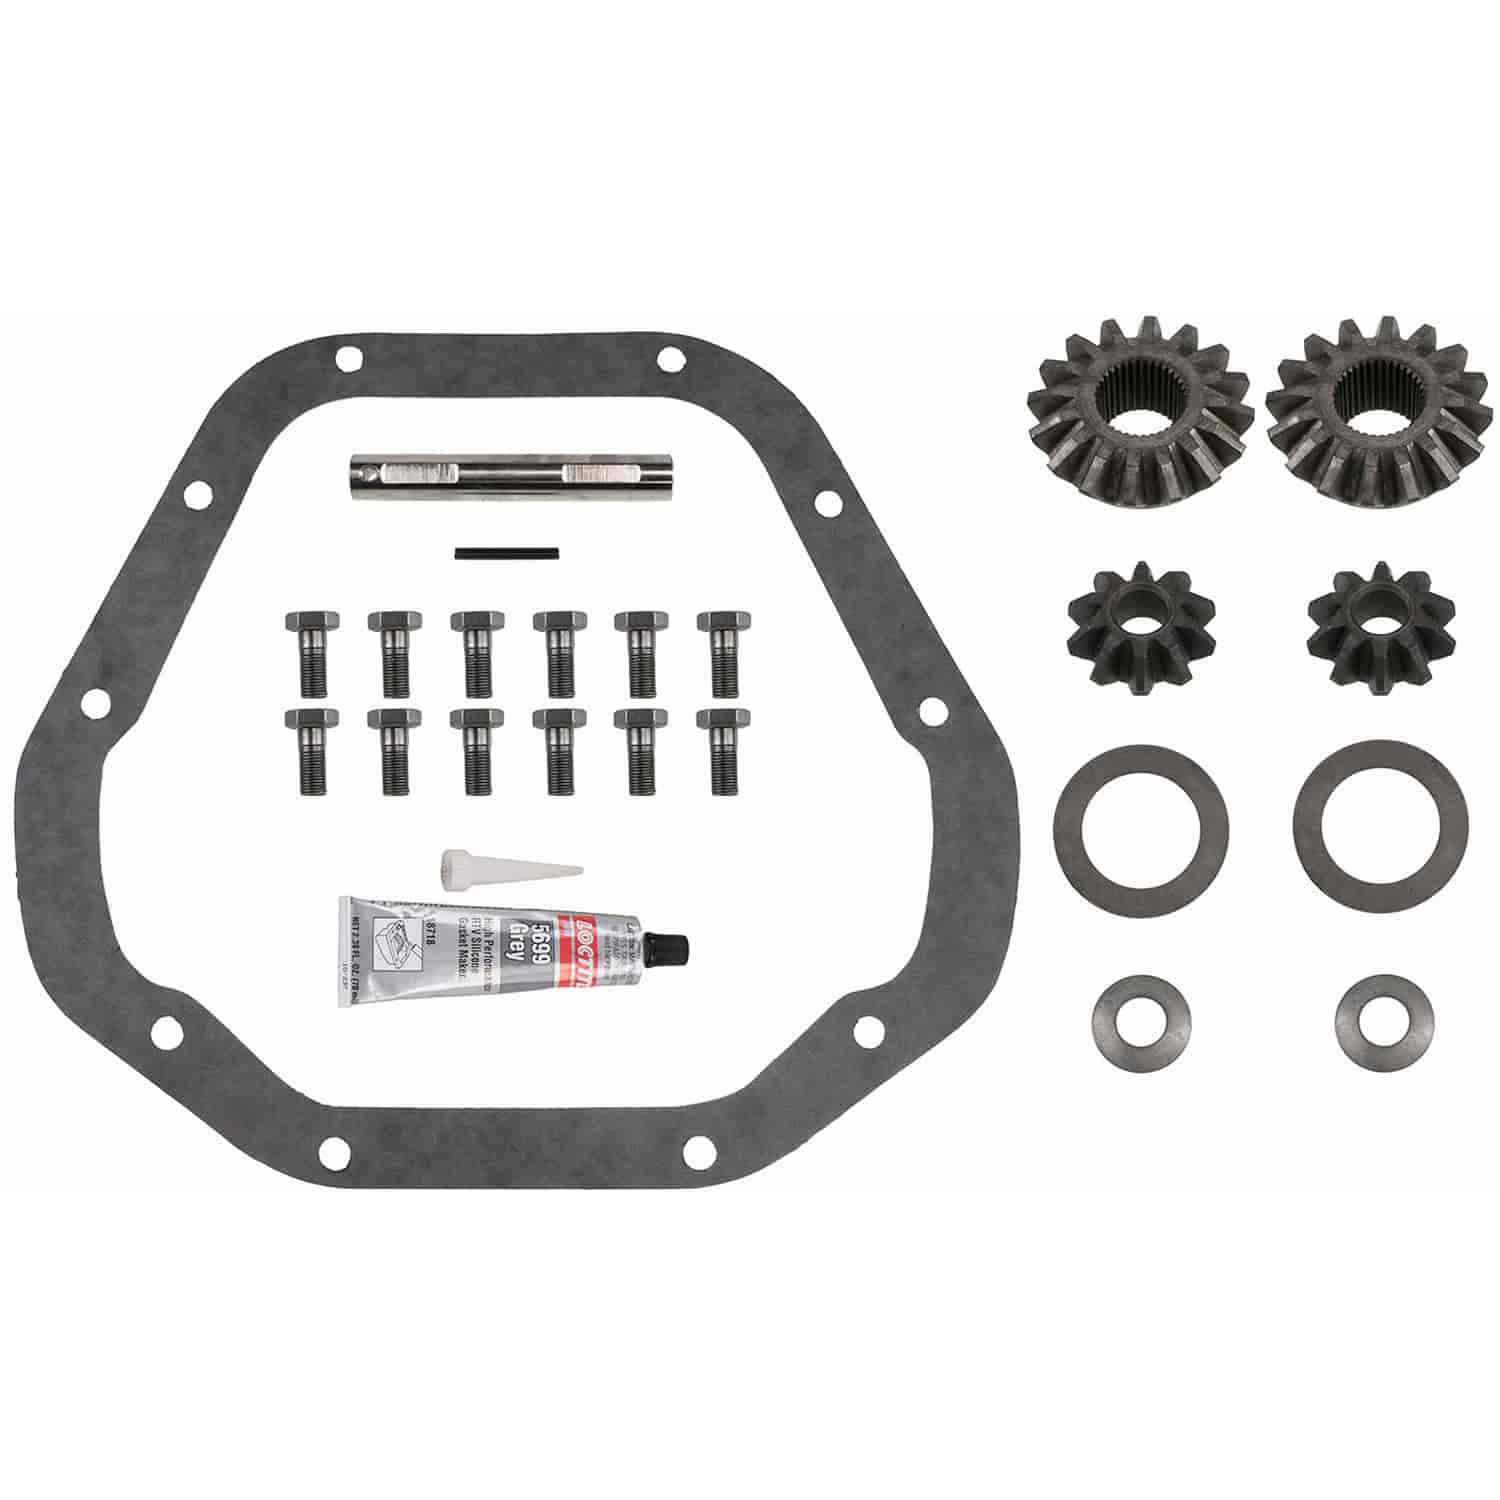 Open Differential Internal Kit Incl. Side And Pinion Gears/Washers/Pinion Shaft And Lock Bolt Or Roll Pin 4.10 Ratio And Down